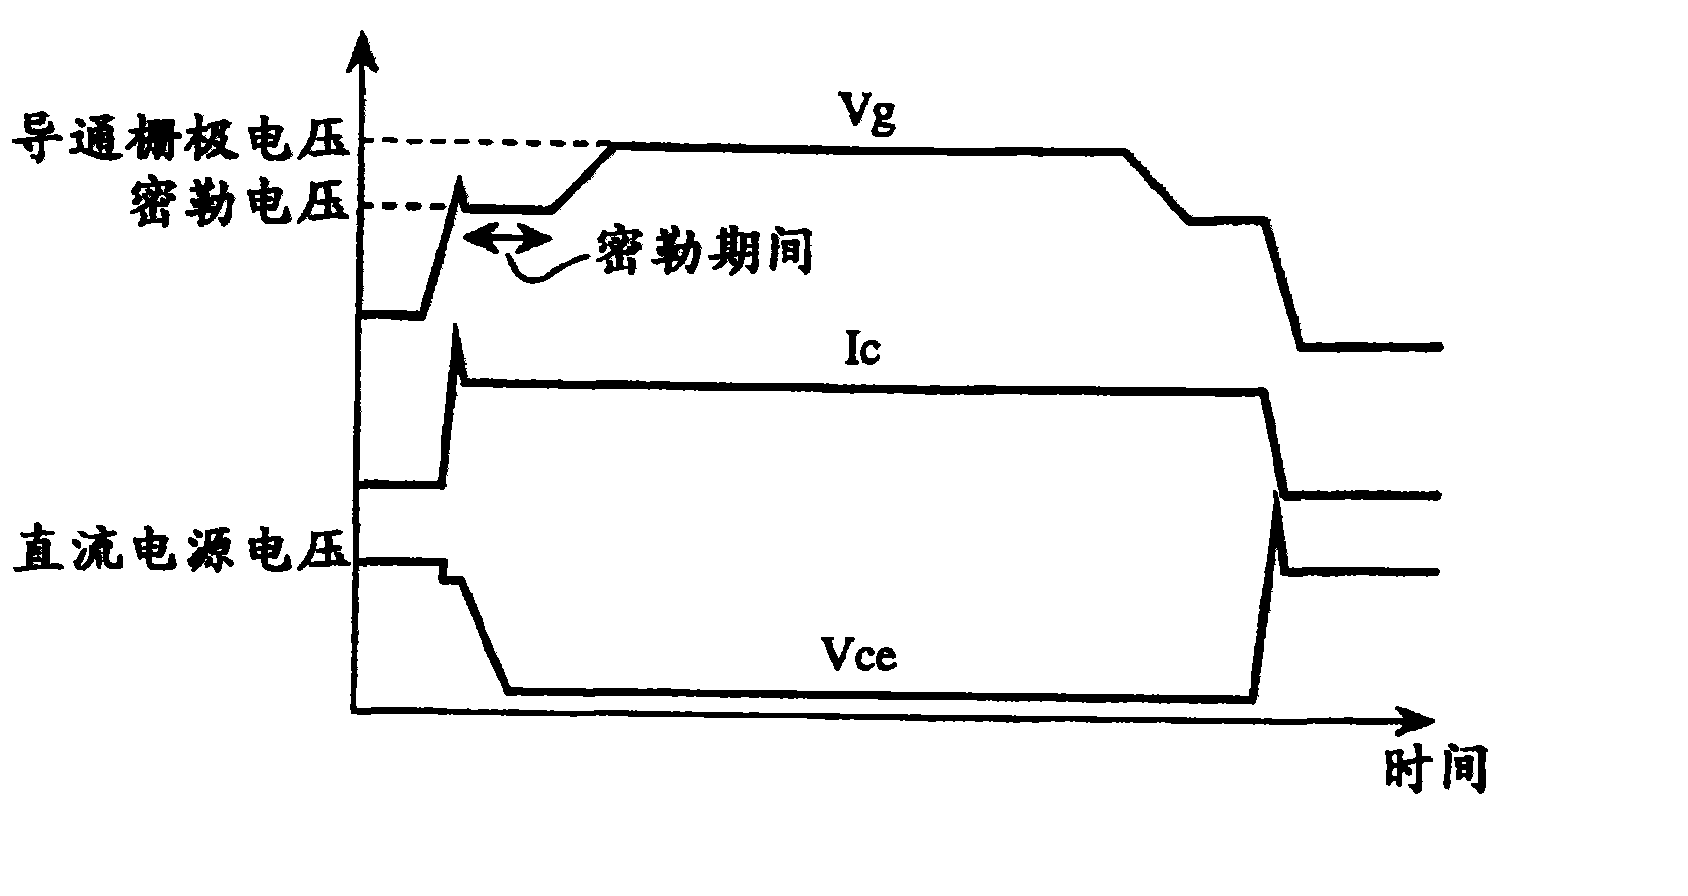 Driving circuit for power semiconductor element